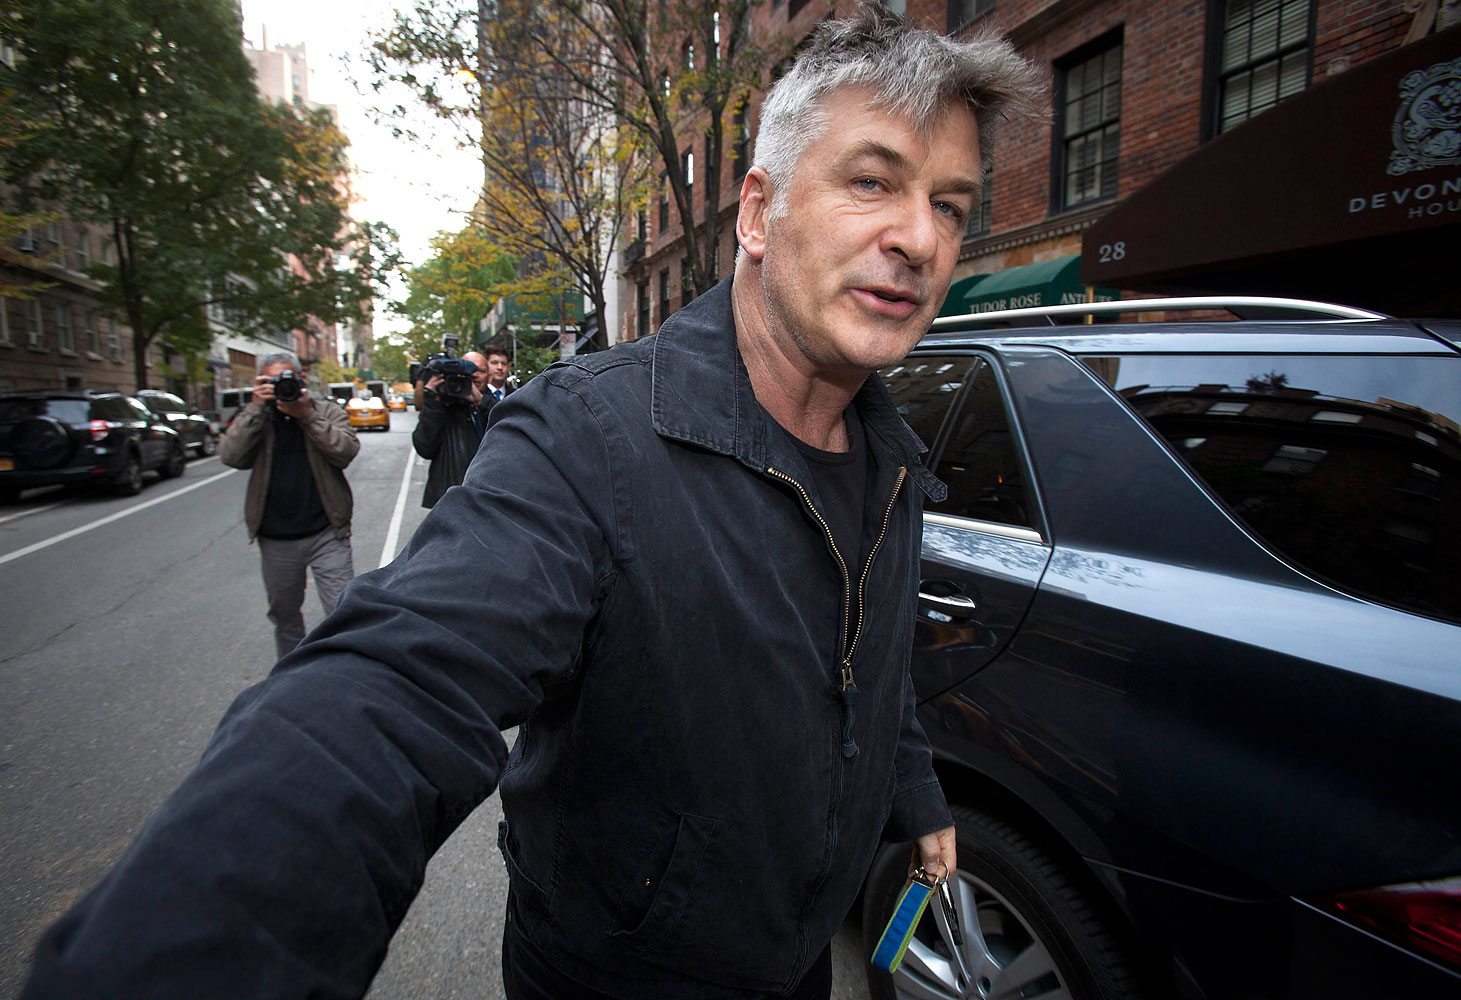 Actor Alec Baldwin shoves a photographer and tells him to move out of his way after he arrived at his home in New York on November 15, 2013. (Carlo Allegri—Reuters)